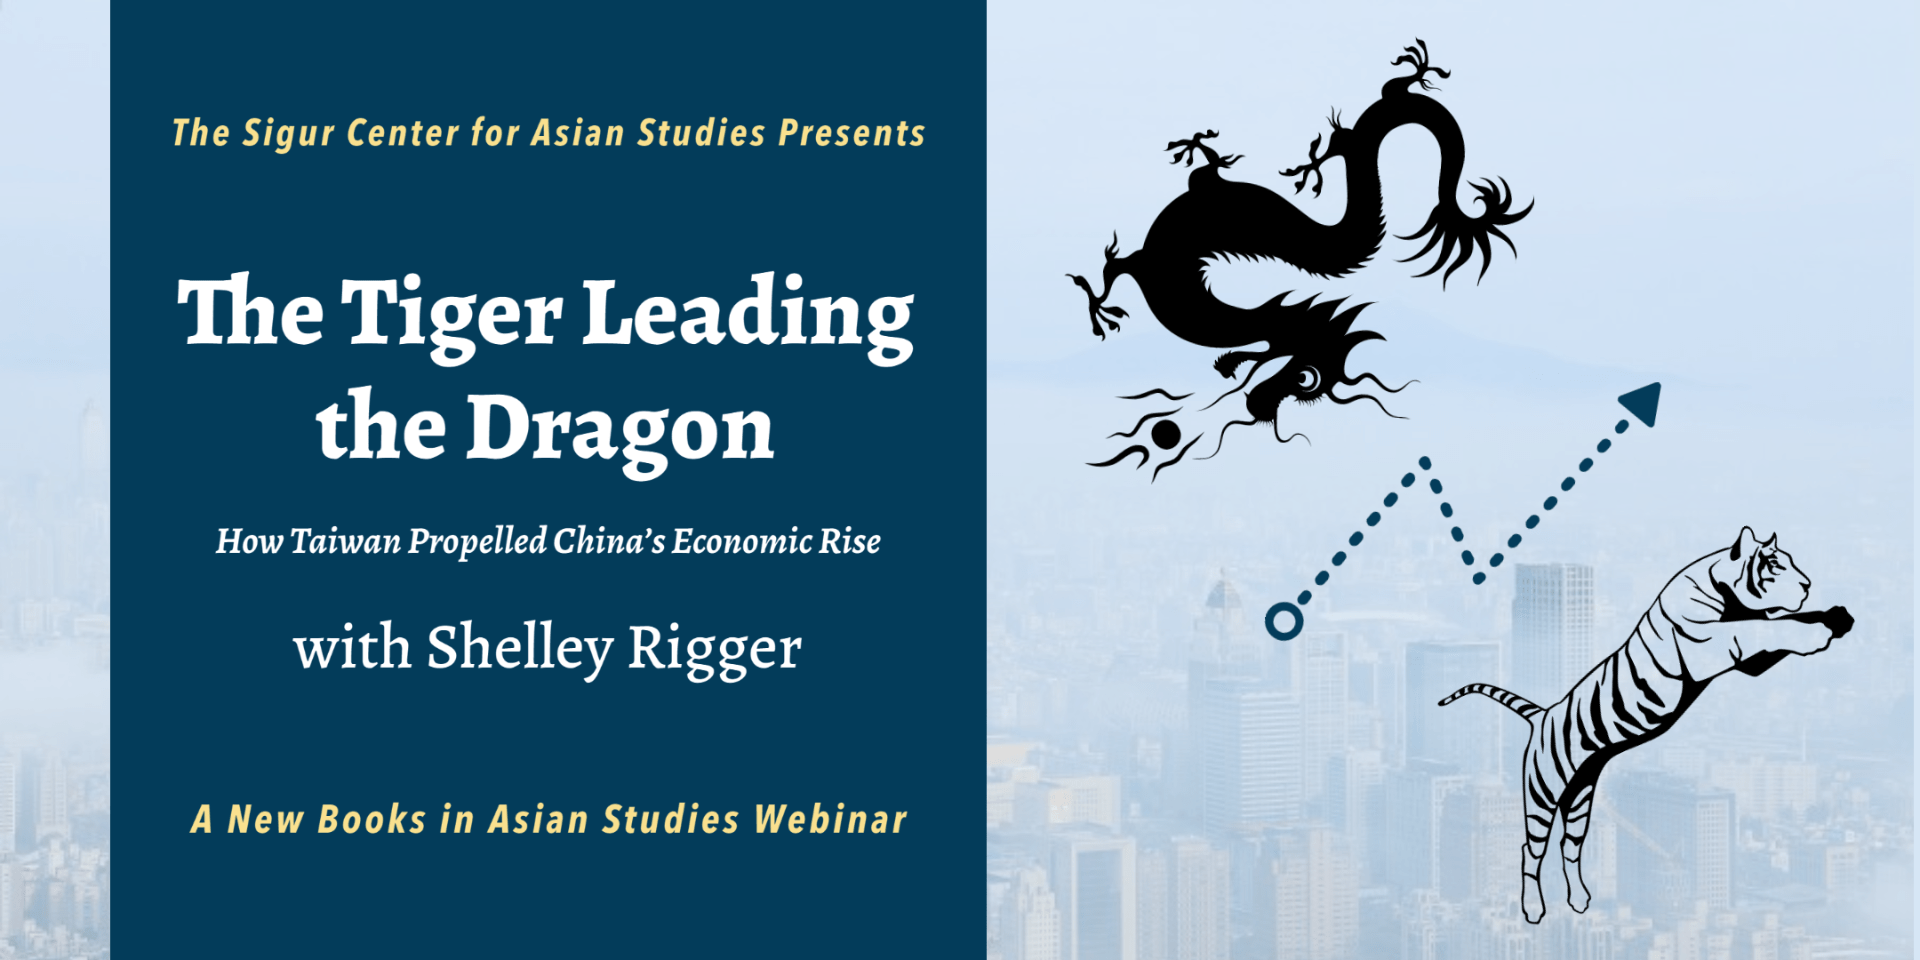 event title next to graphics of tiger and dragon; text: The Tiger Leading the Dragon